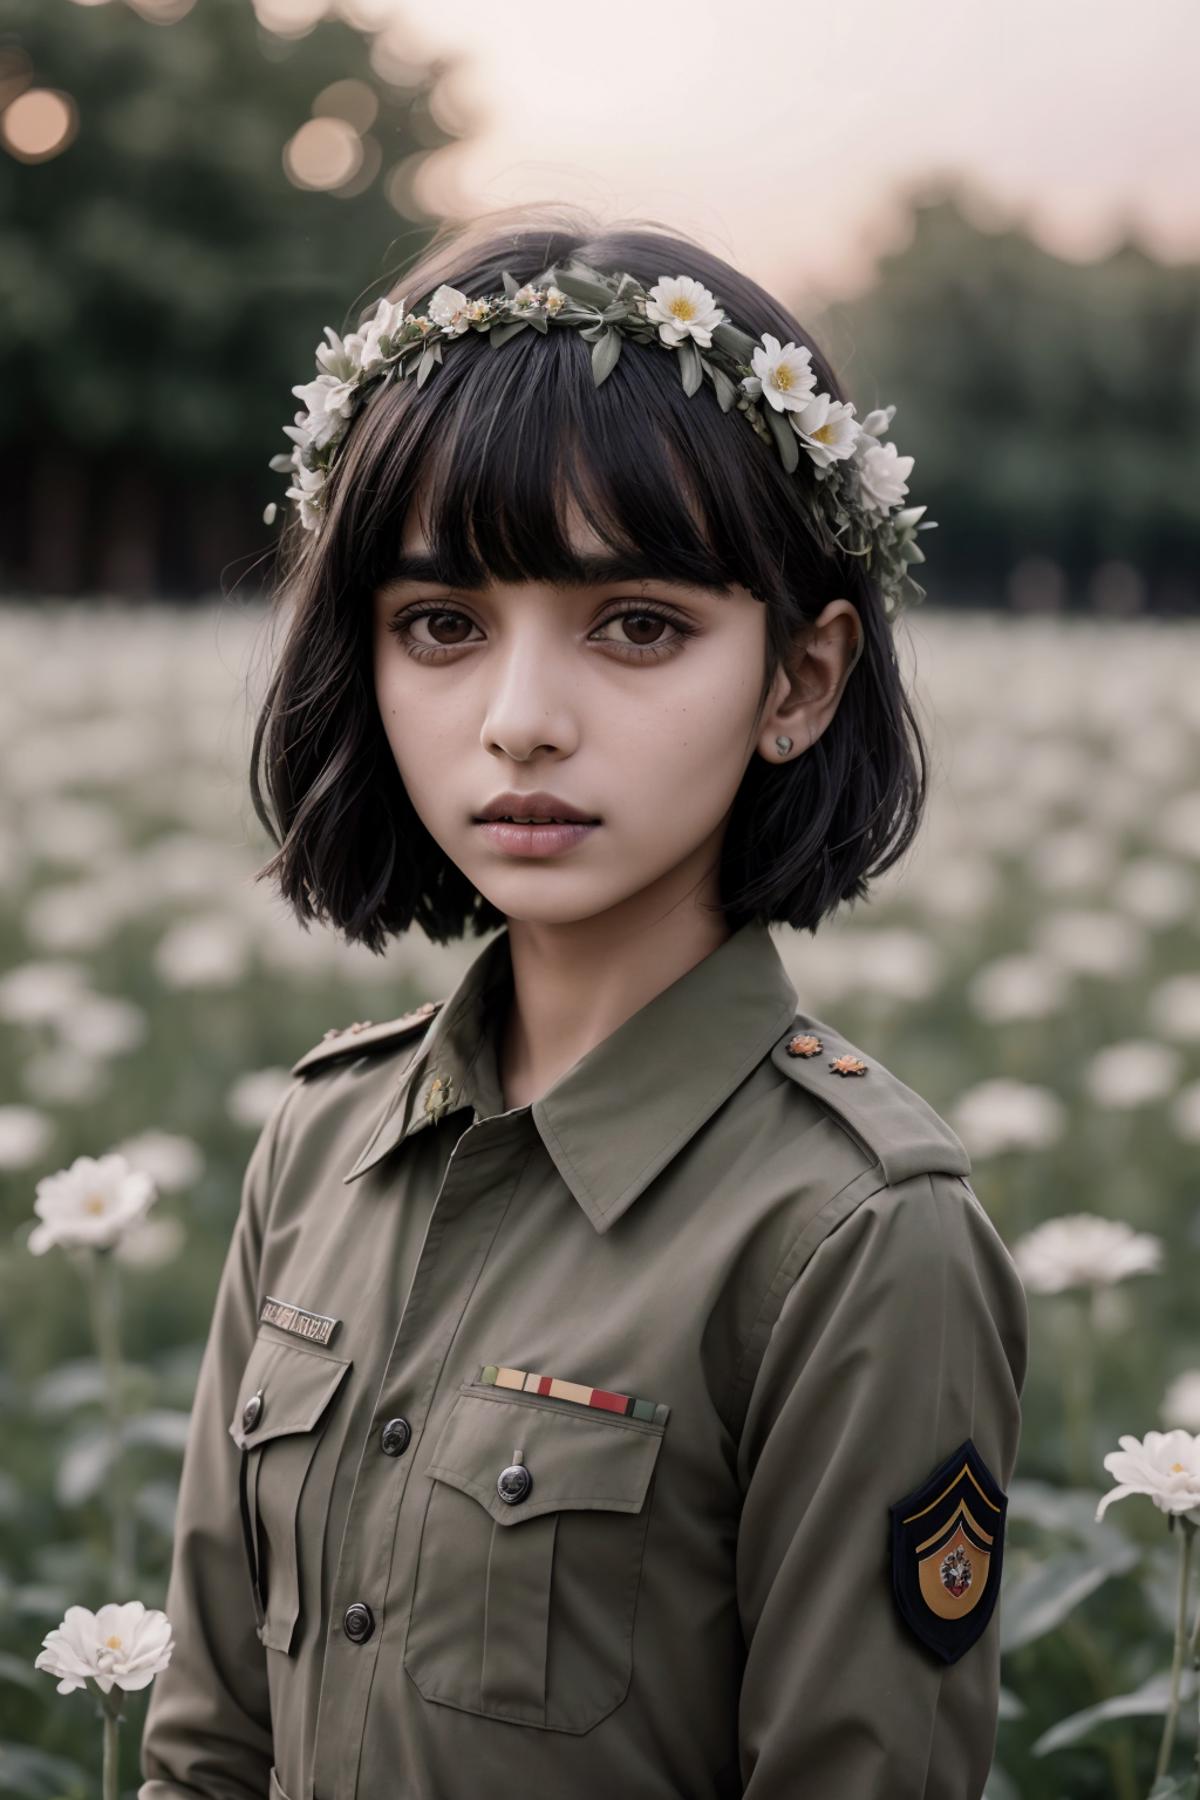 A young girl wearing a green uniform and a white flower crown.